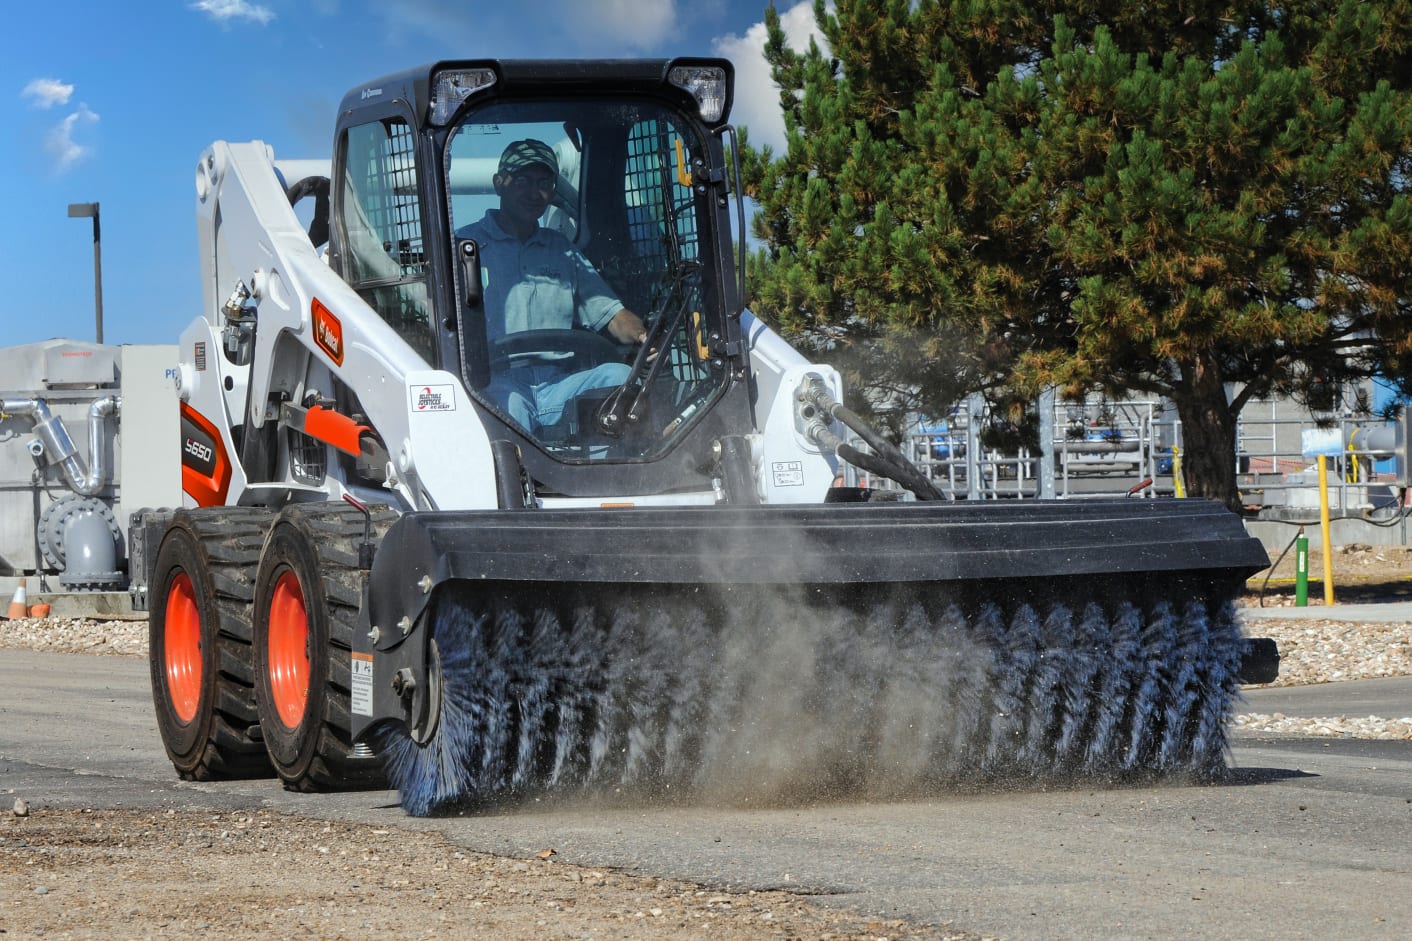 Browse Specs and more for the Bobcat S650 Skid-Steer Loader - Bobcat of North Texas